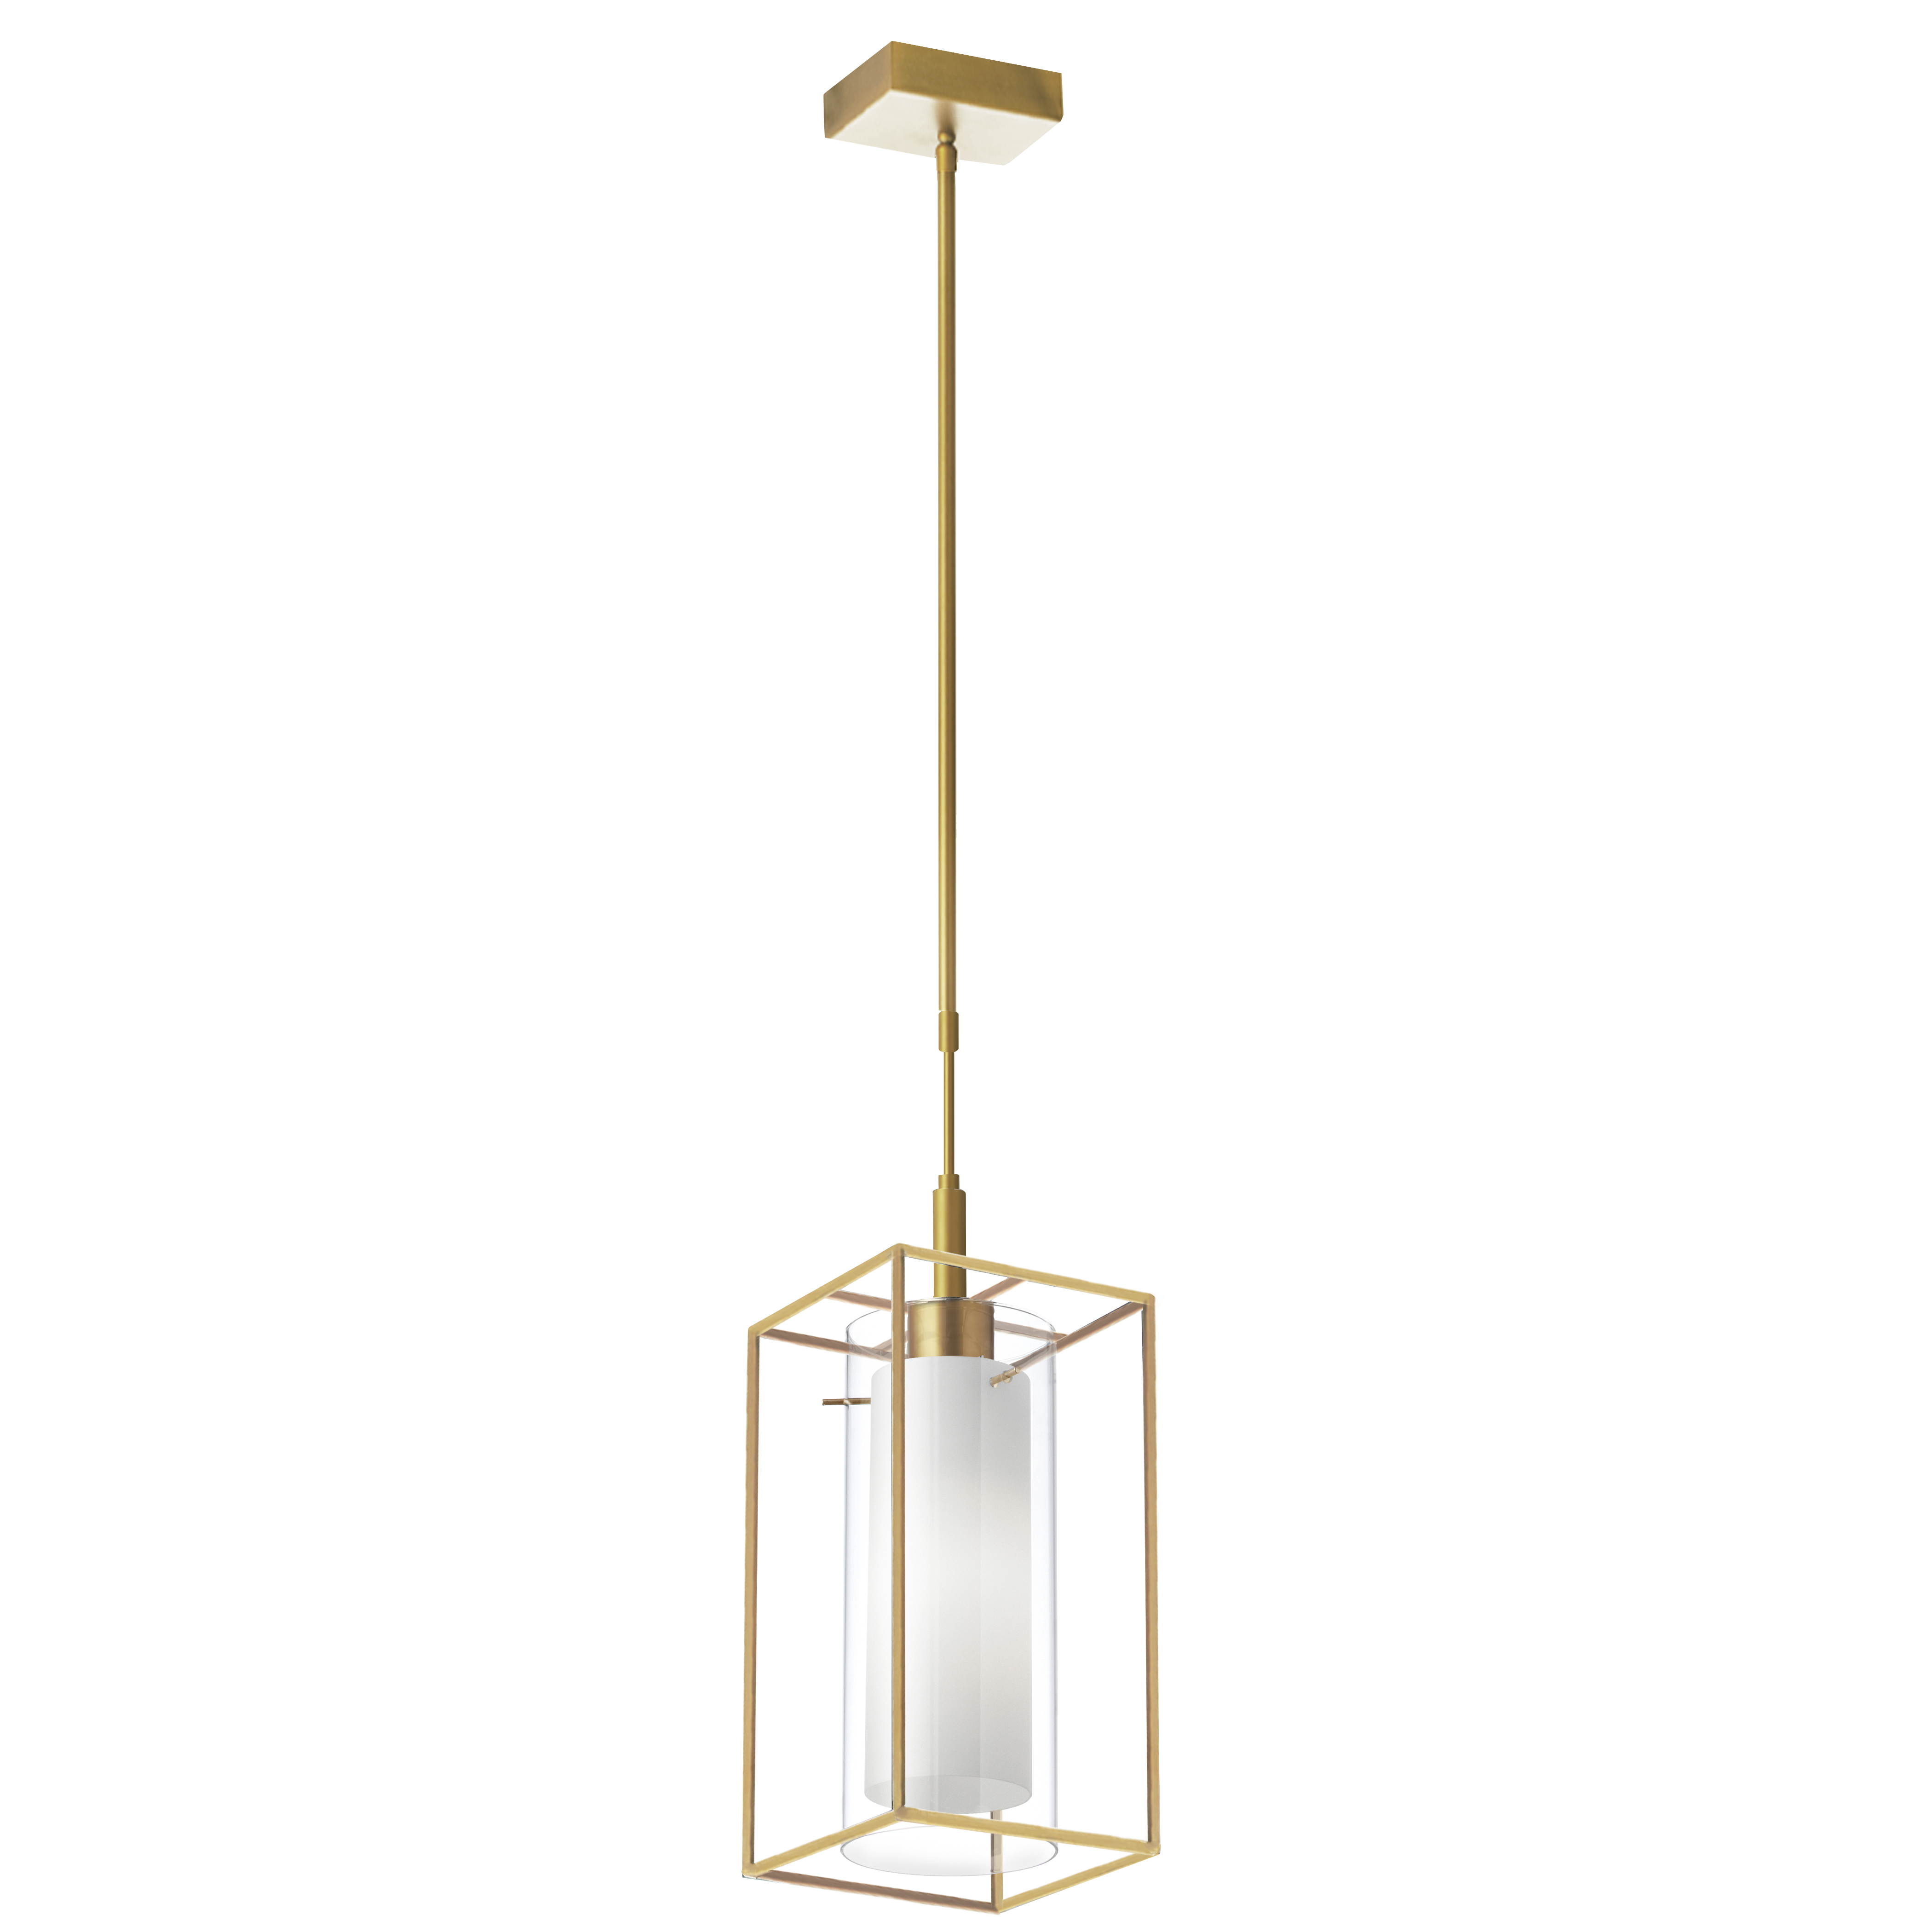 Straight and curved lines provide an eye-catching contrast in the Cubo family of lighting. If style is all in the details, Crawford lighting jumps ahead of the crowd. A rectangular metal base drops from a straight rod, crafted in an open design with a grid on the top side to accommodate the light housing. Inside, a glass cylinder holds the light. Available in a variety of finishes, it will draw attention to the furnishings in a kitchen or dining room, and add a touch of luxury to your foyer.